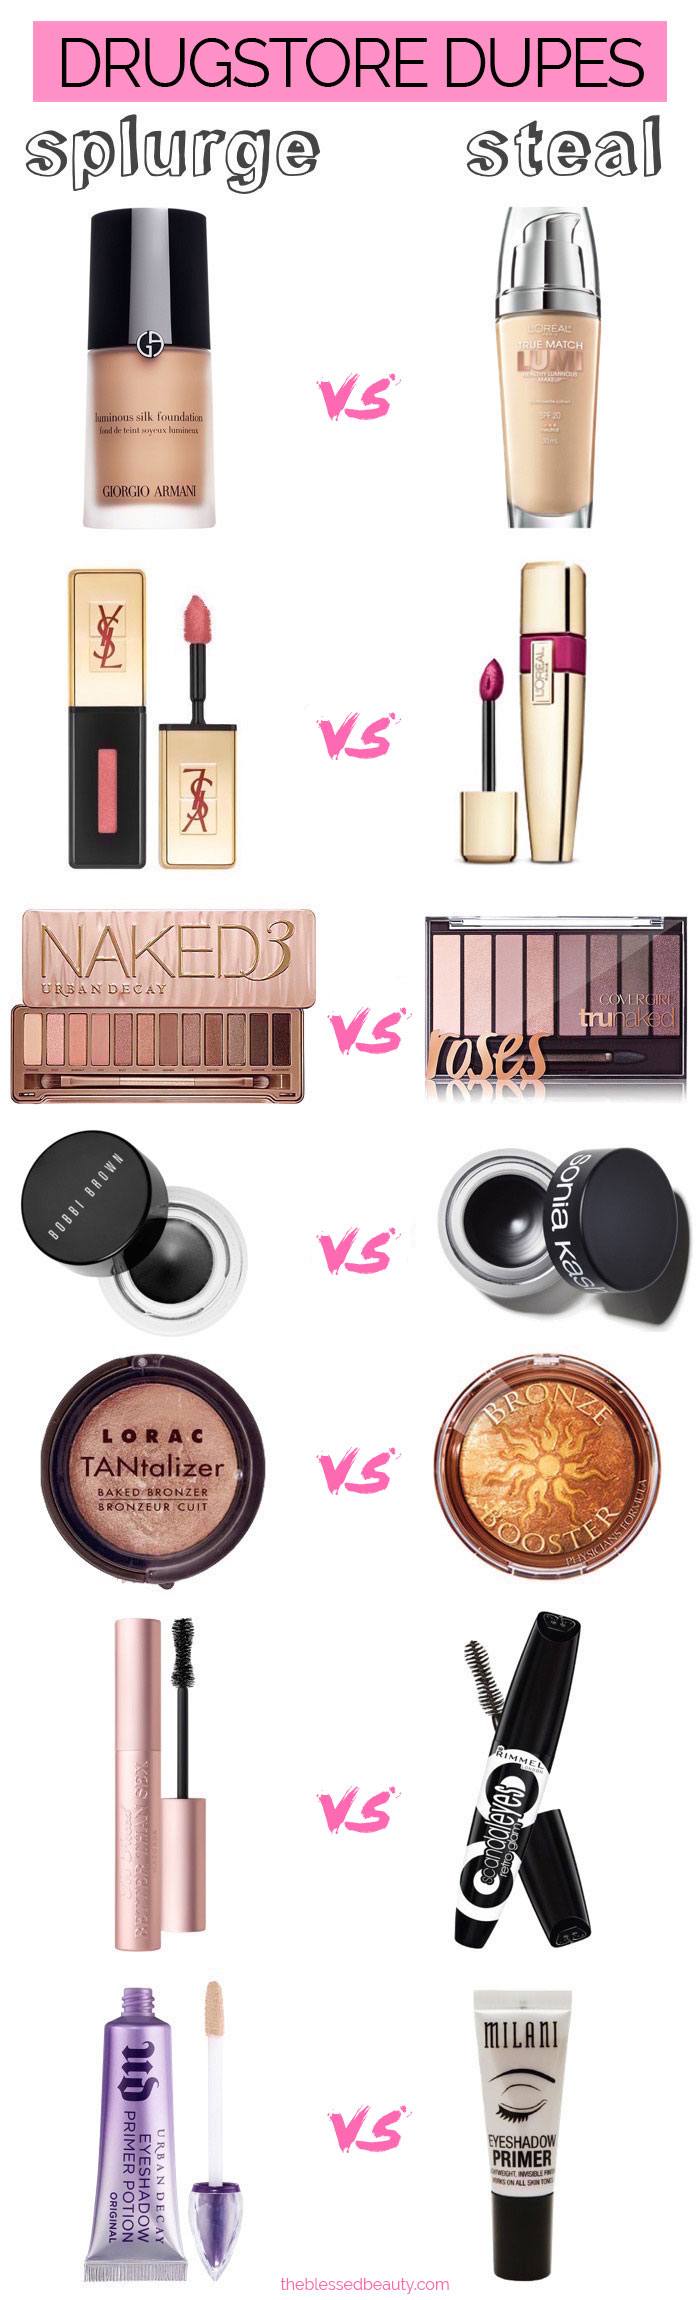 29+ Unbelievable Drugstore Makeup Dupes You have to See to Believe ...